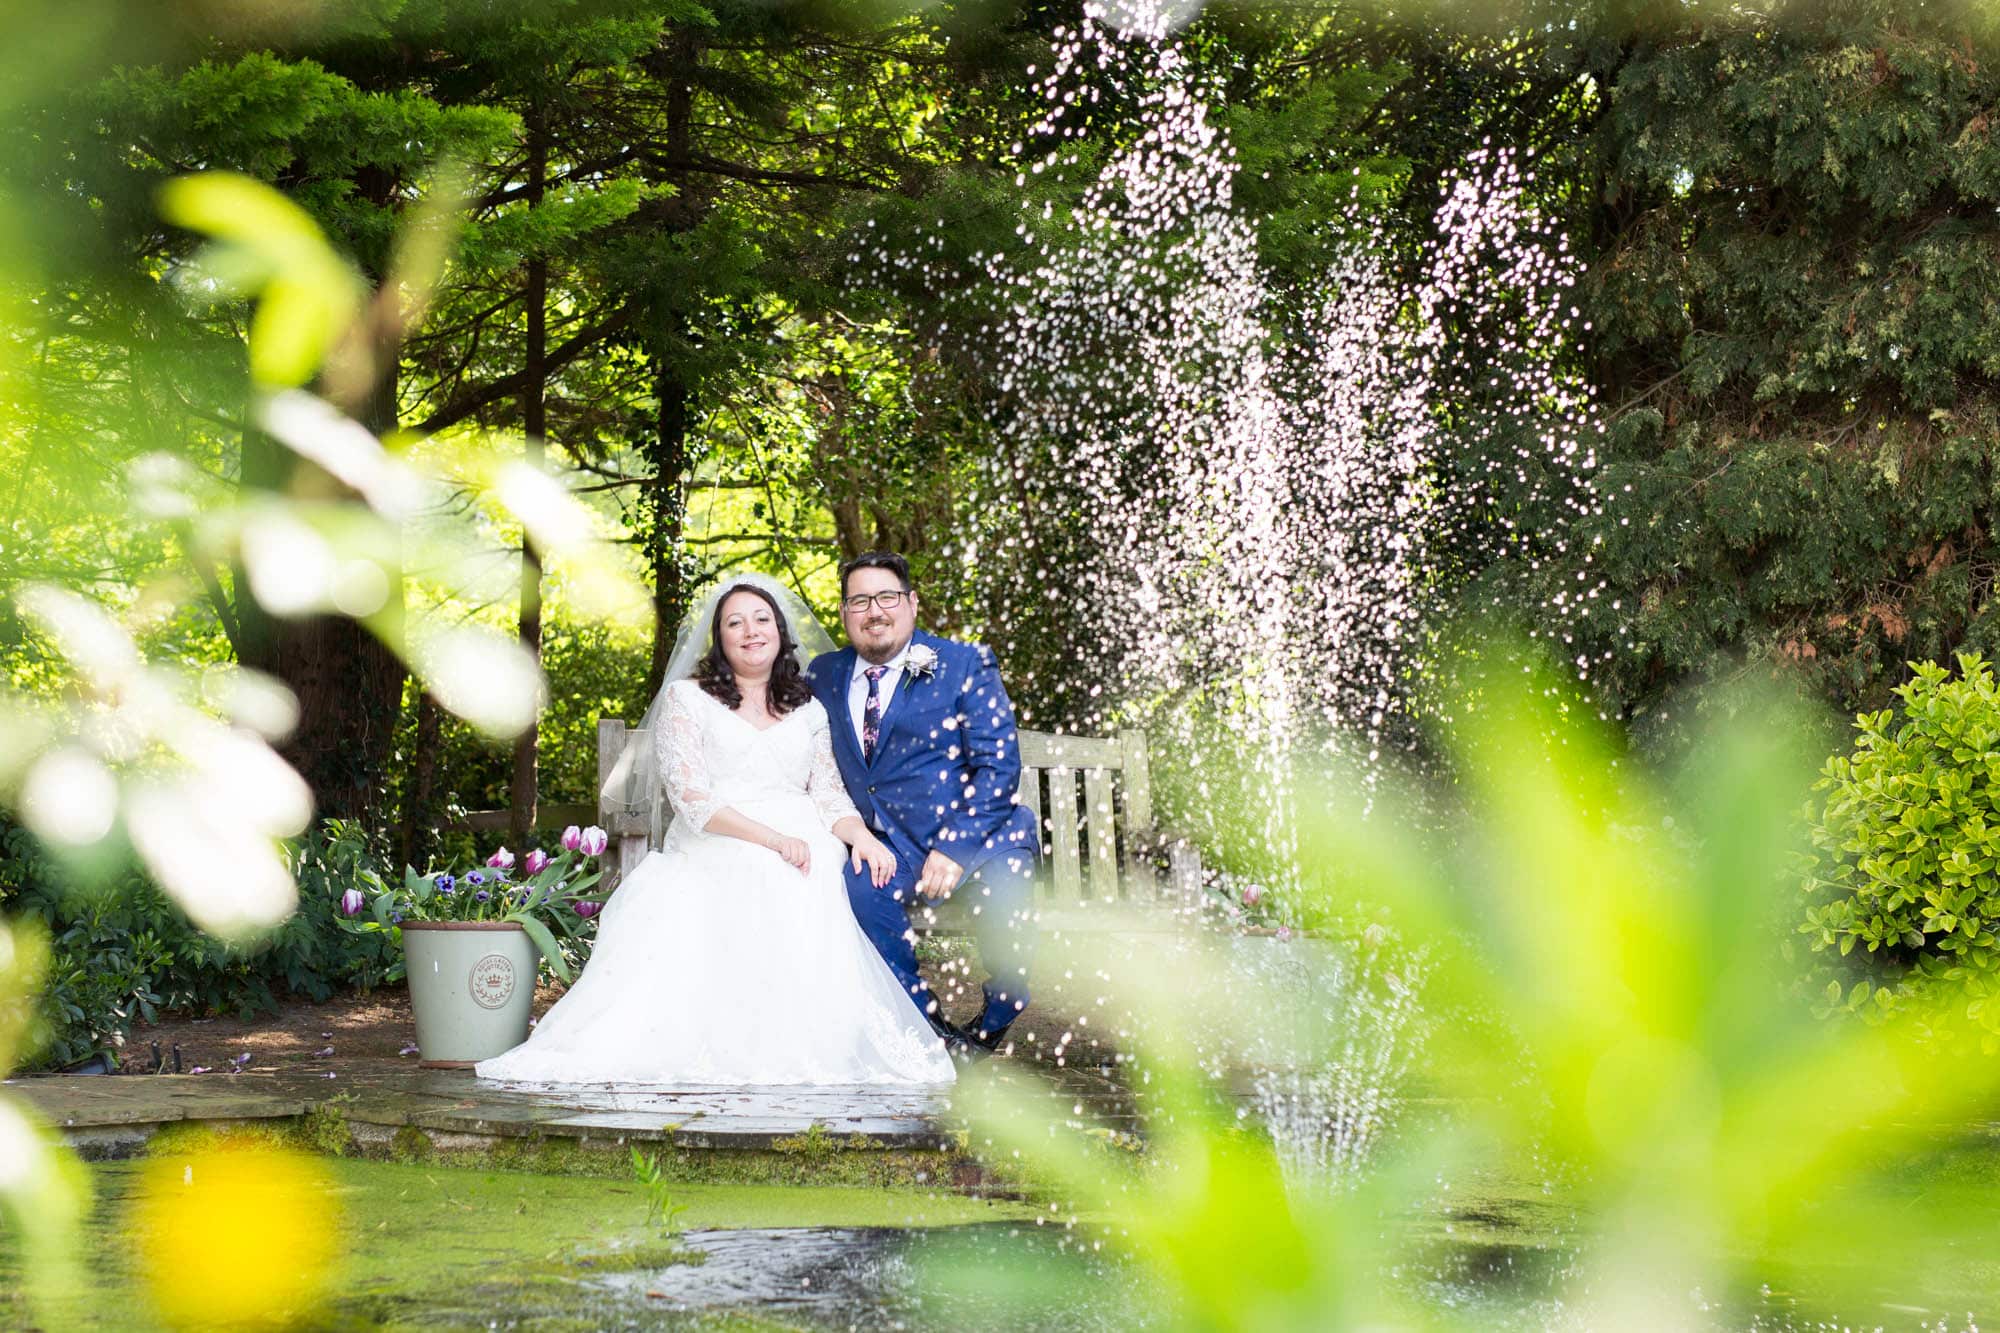 Smiling wedding couple sat on bench by waterfall and surrounded by greenery at Oaks Farm Weddings venue in Croydon